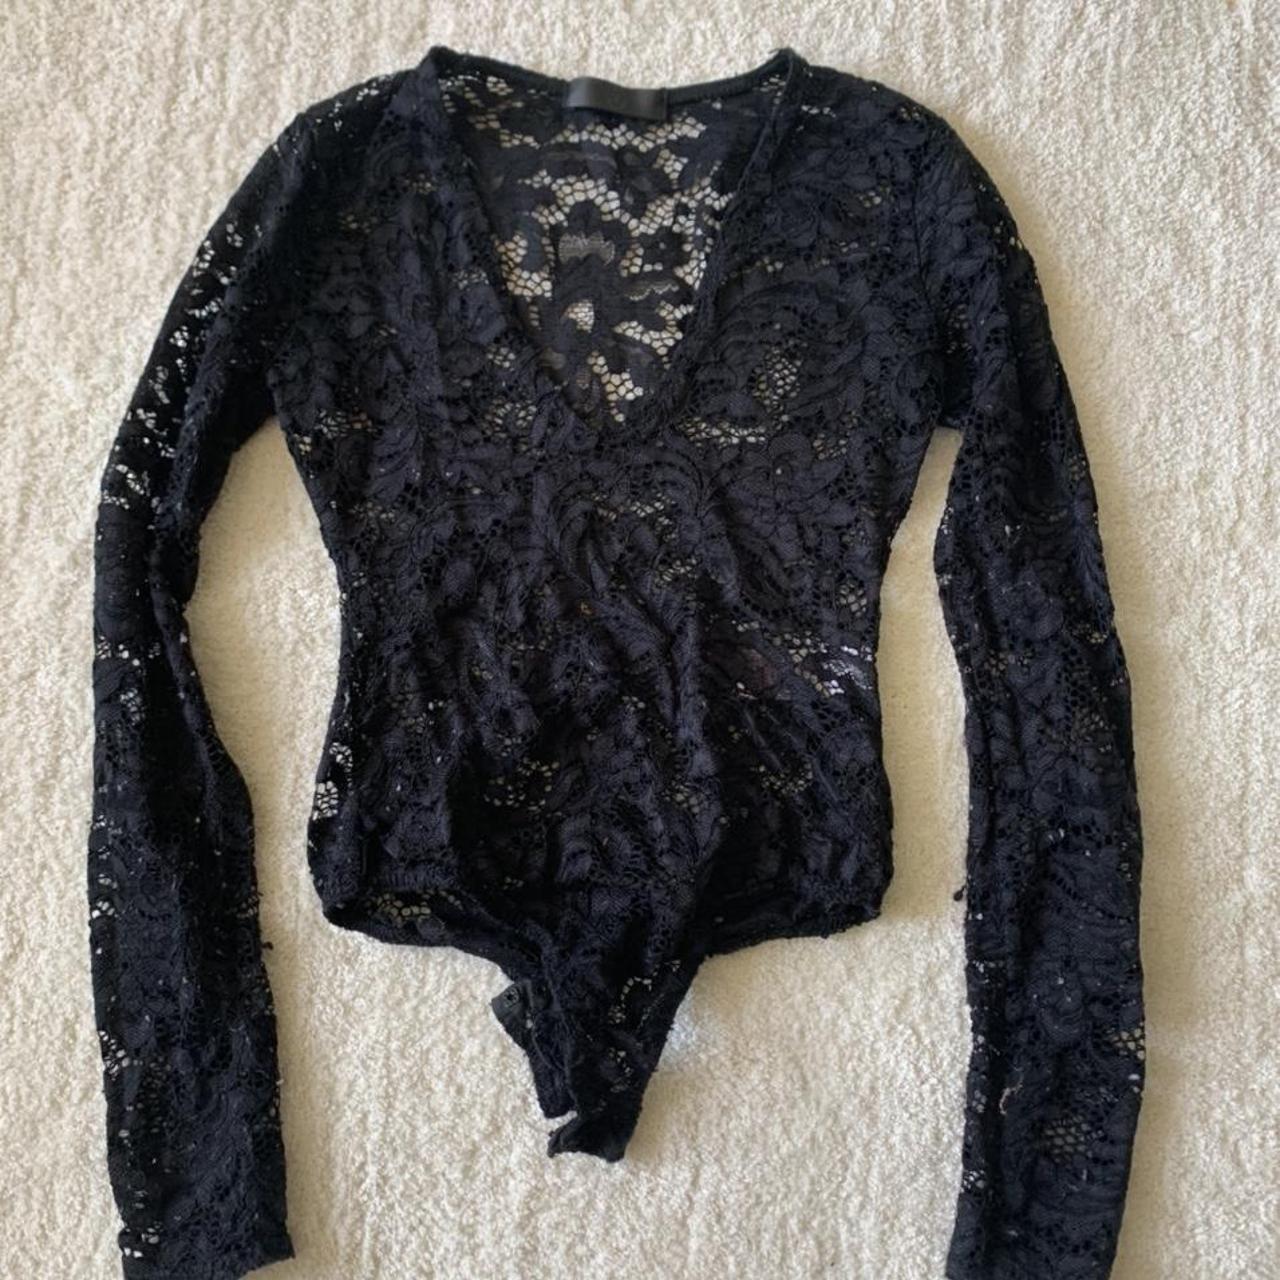 Black scoop neck lace body suit. So stretchy and... - Depop